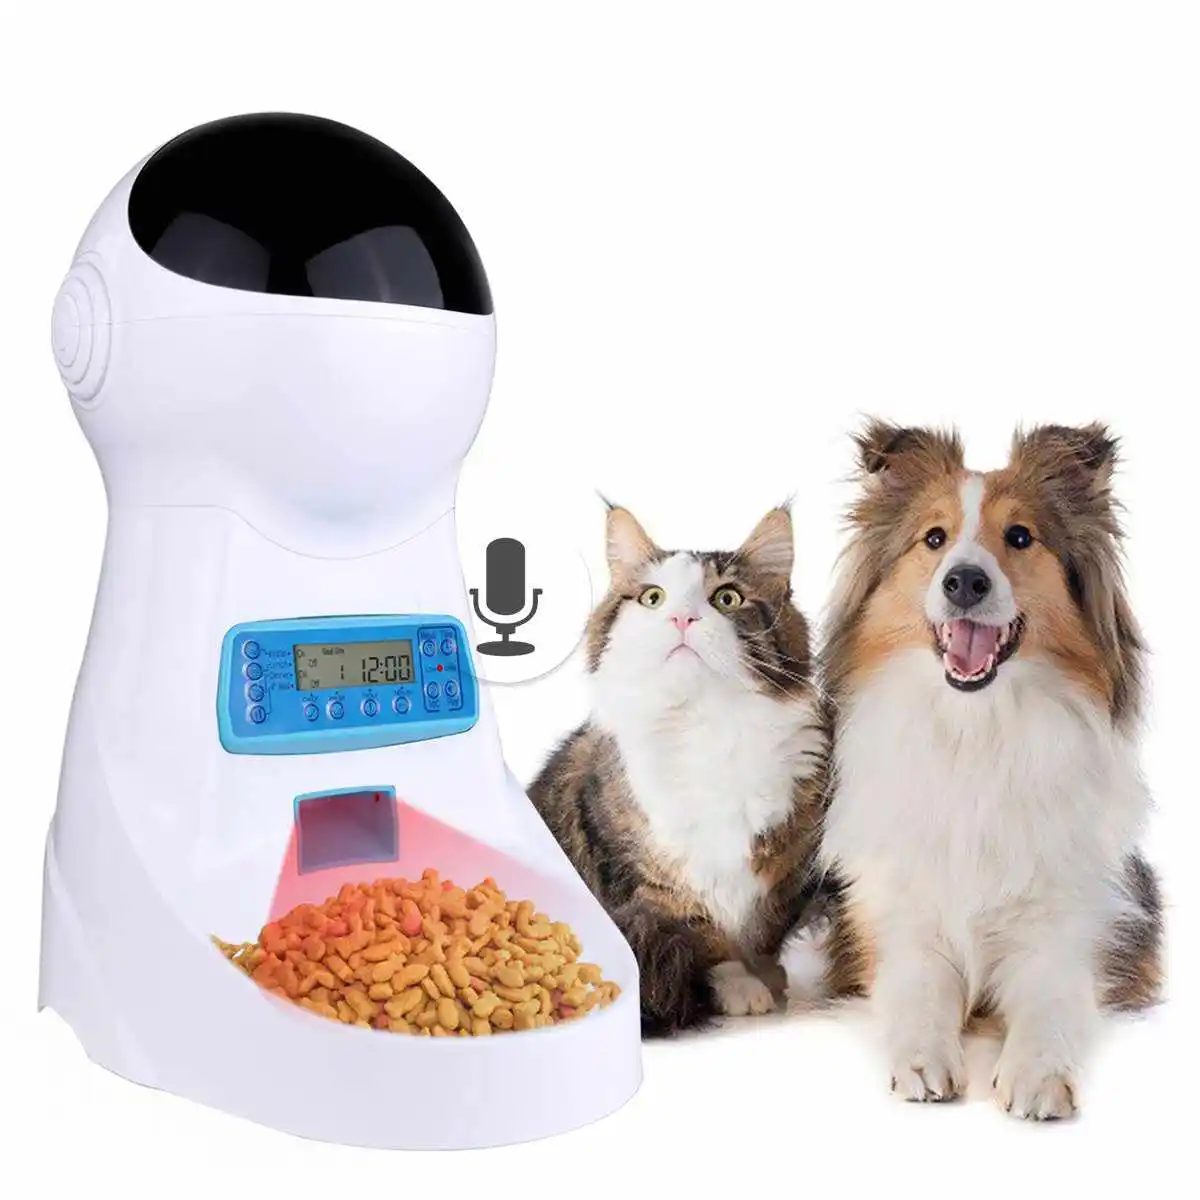 Automatic Pet Feeder, Dogs Cats Food Dispenser With Voice Record Remind, Timer Programmable, Portion Control, Distribution Ala